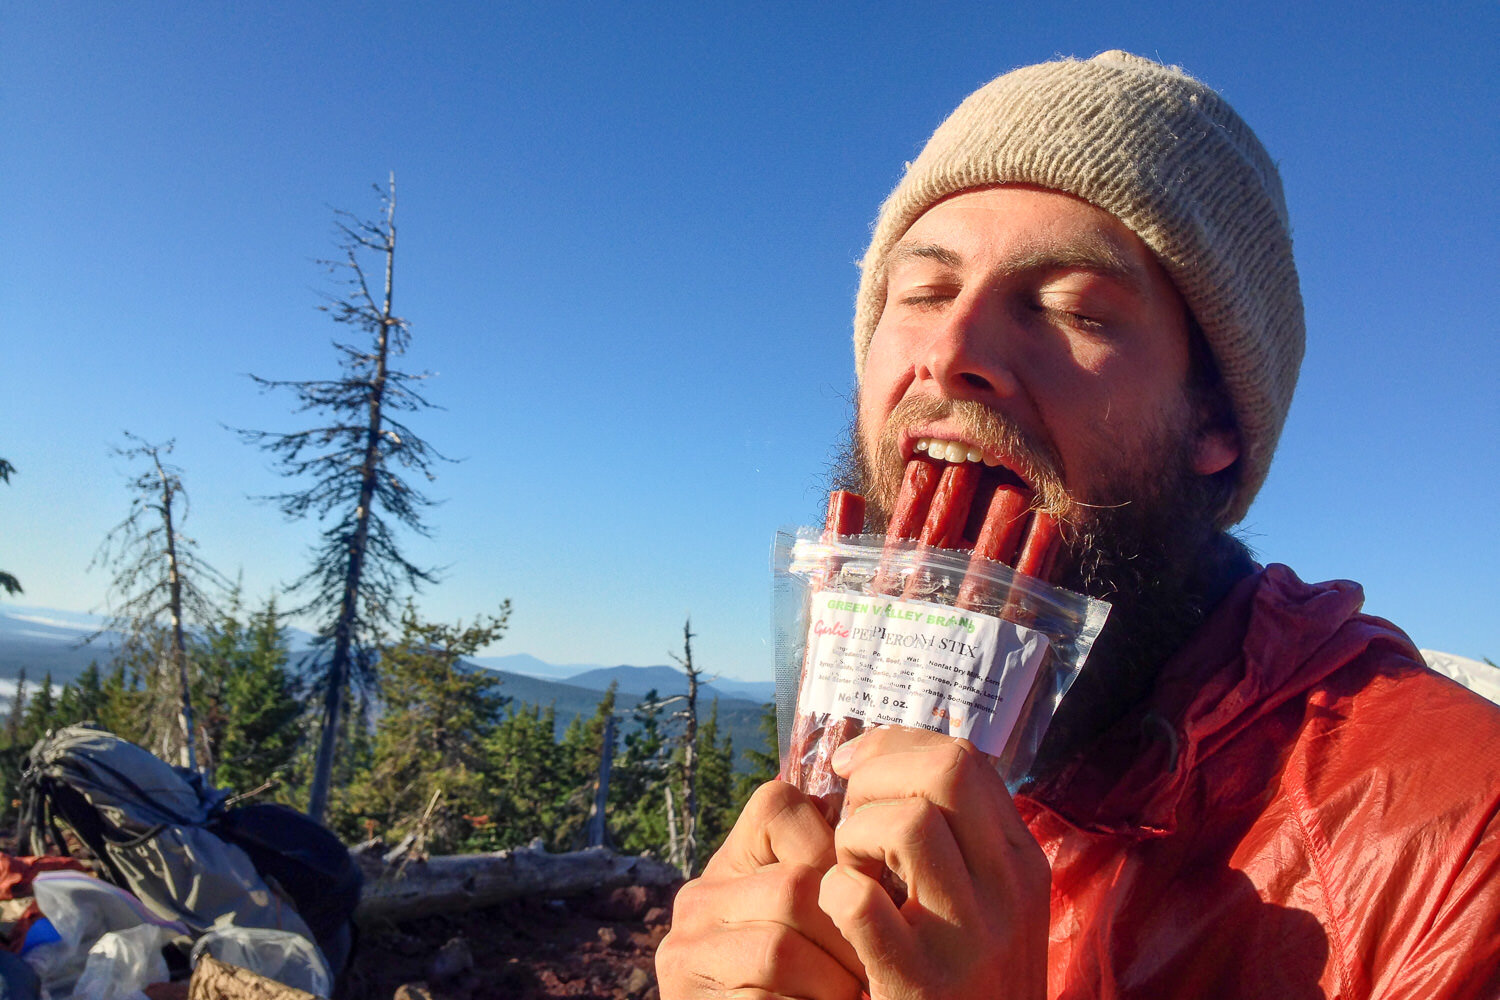 Hiker Hunger is the real deal - don’t skimp on food